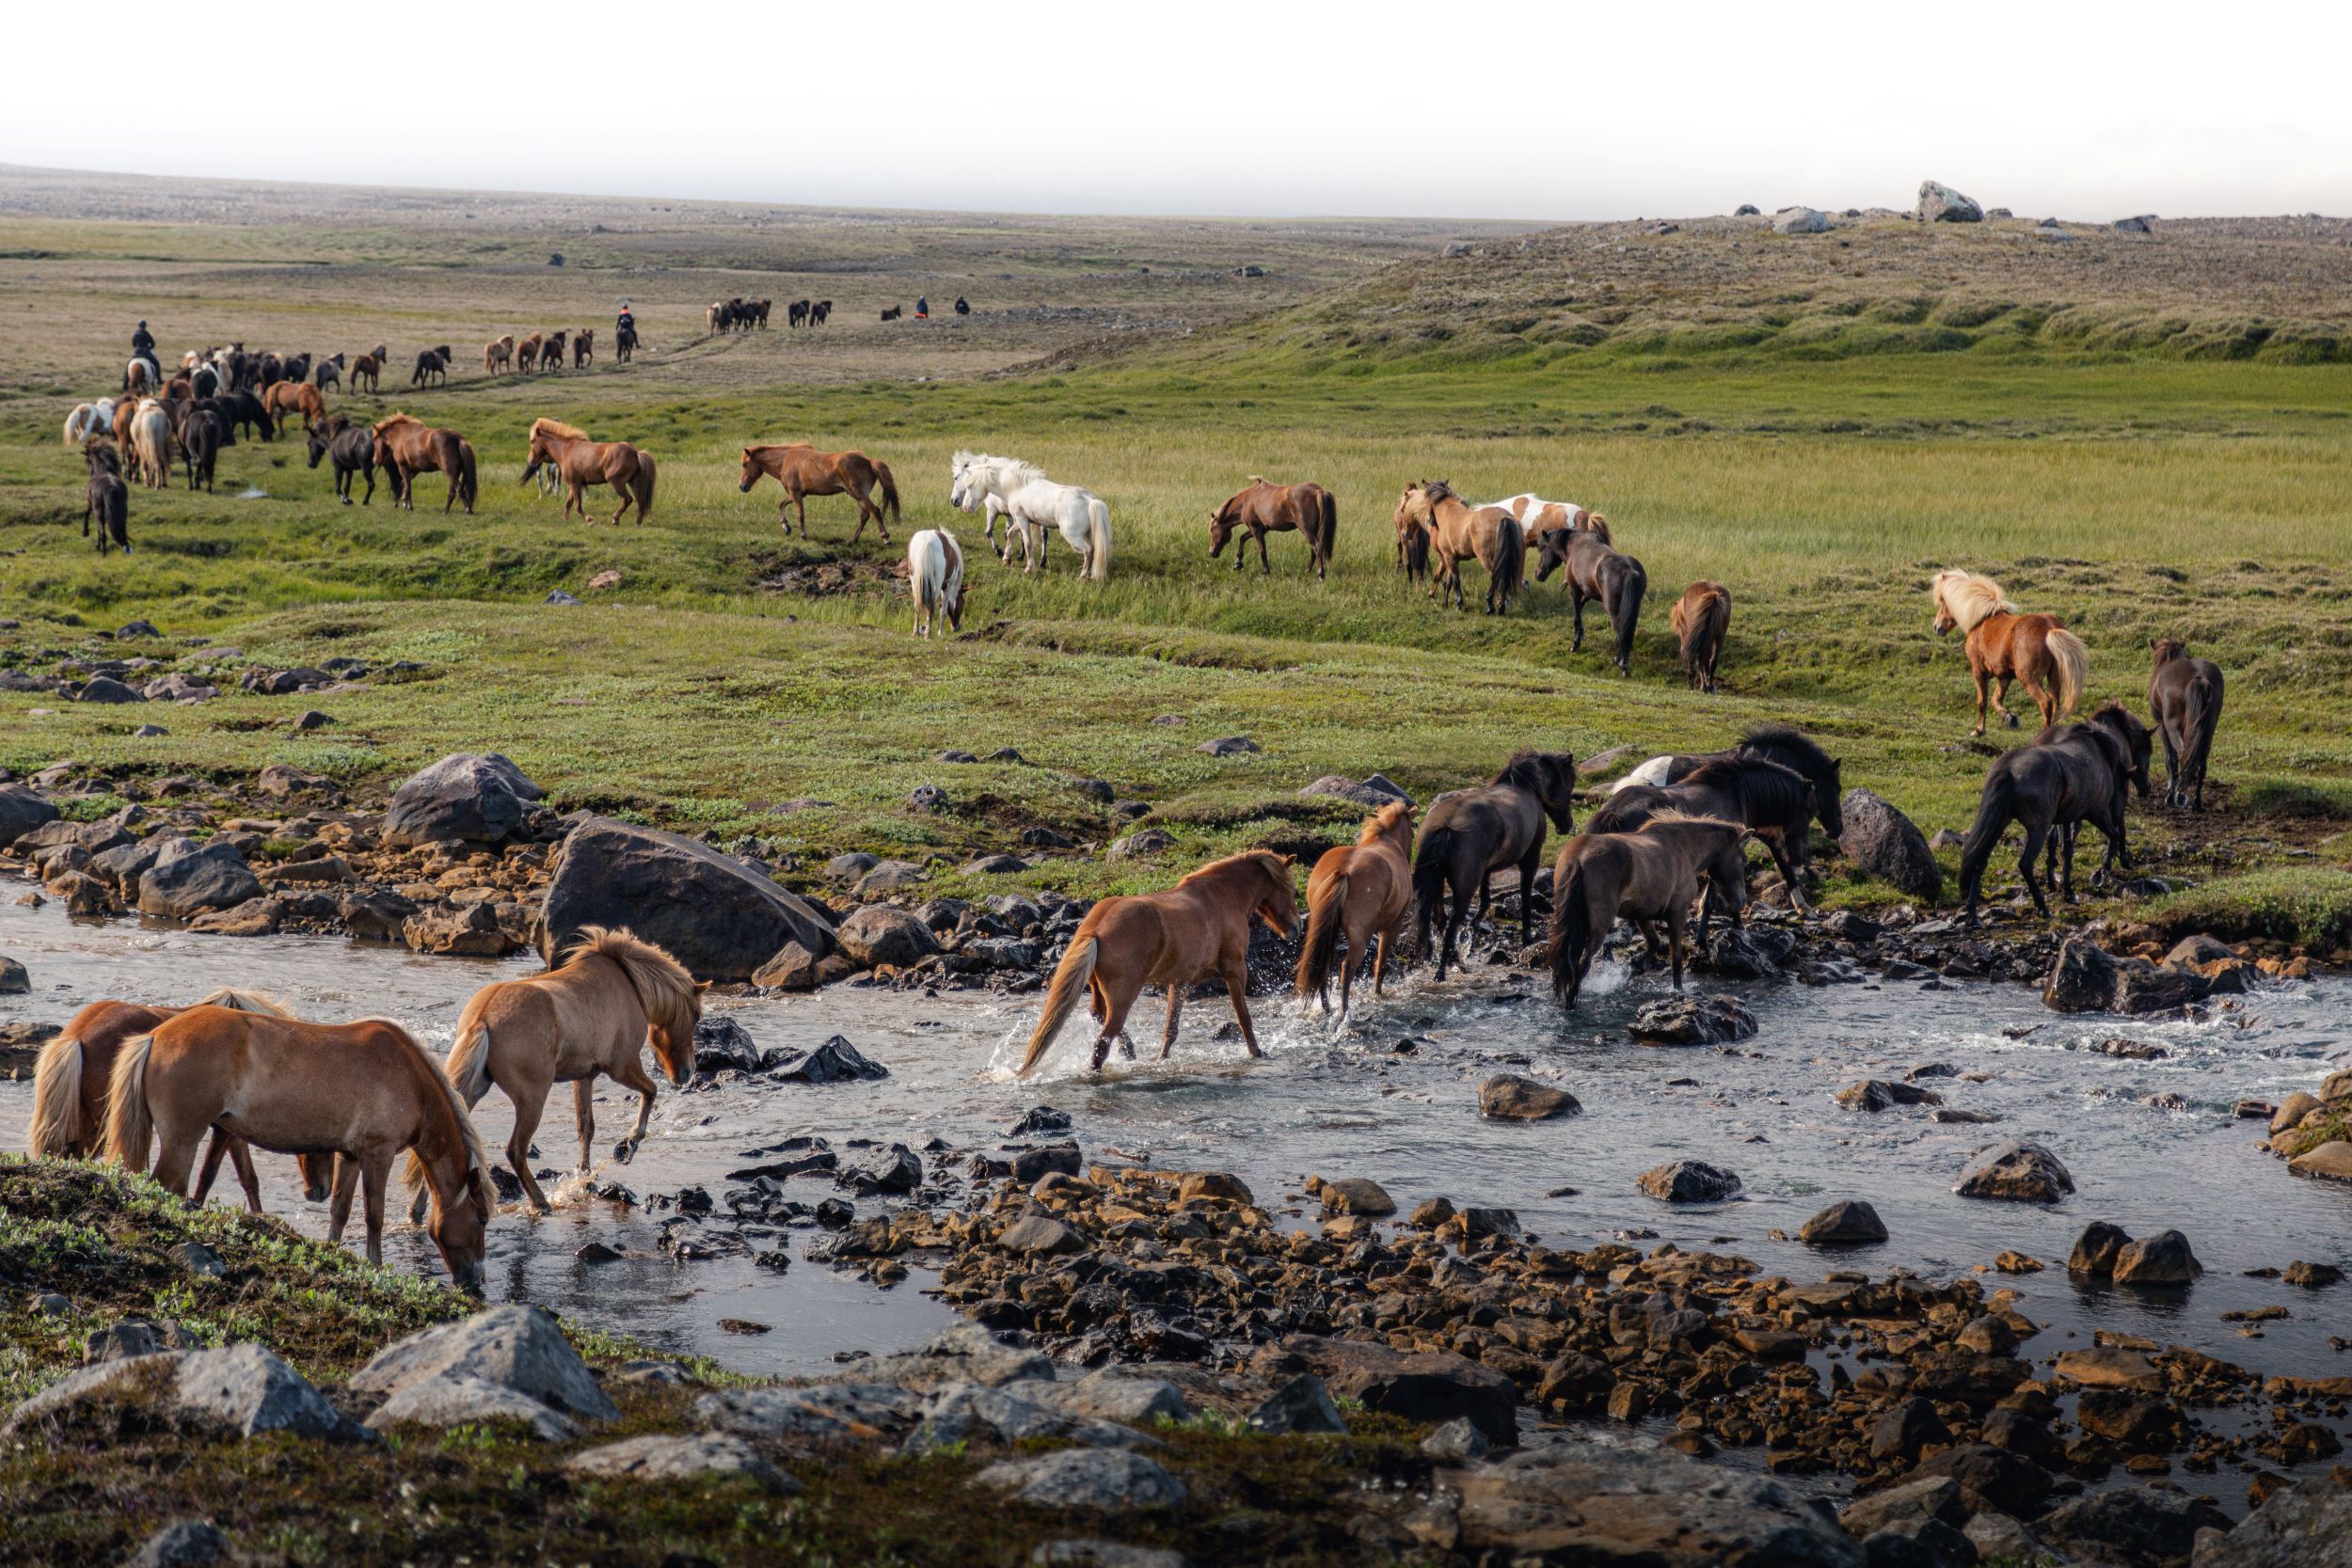 A long line of horses fording a shallow river.